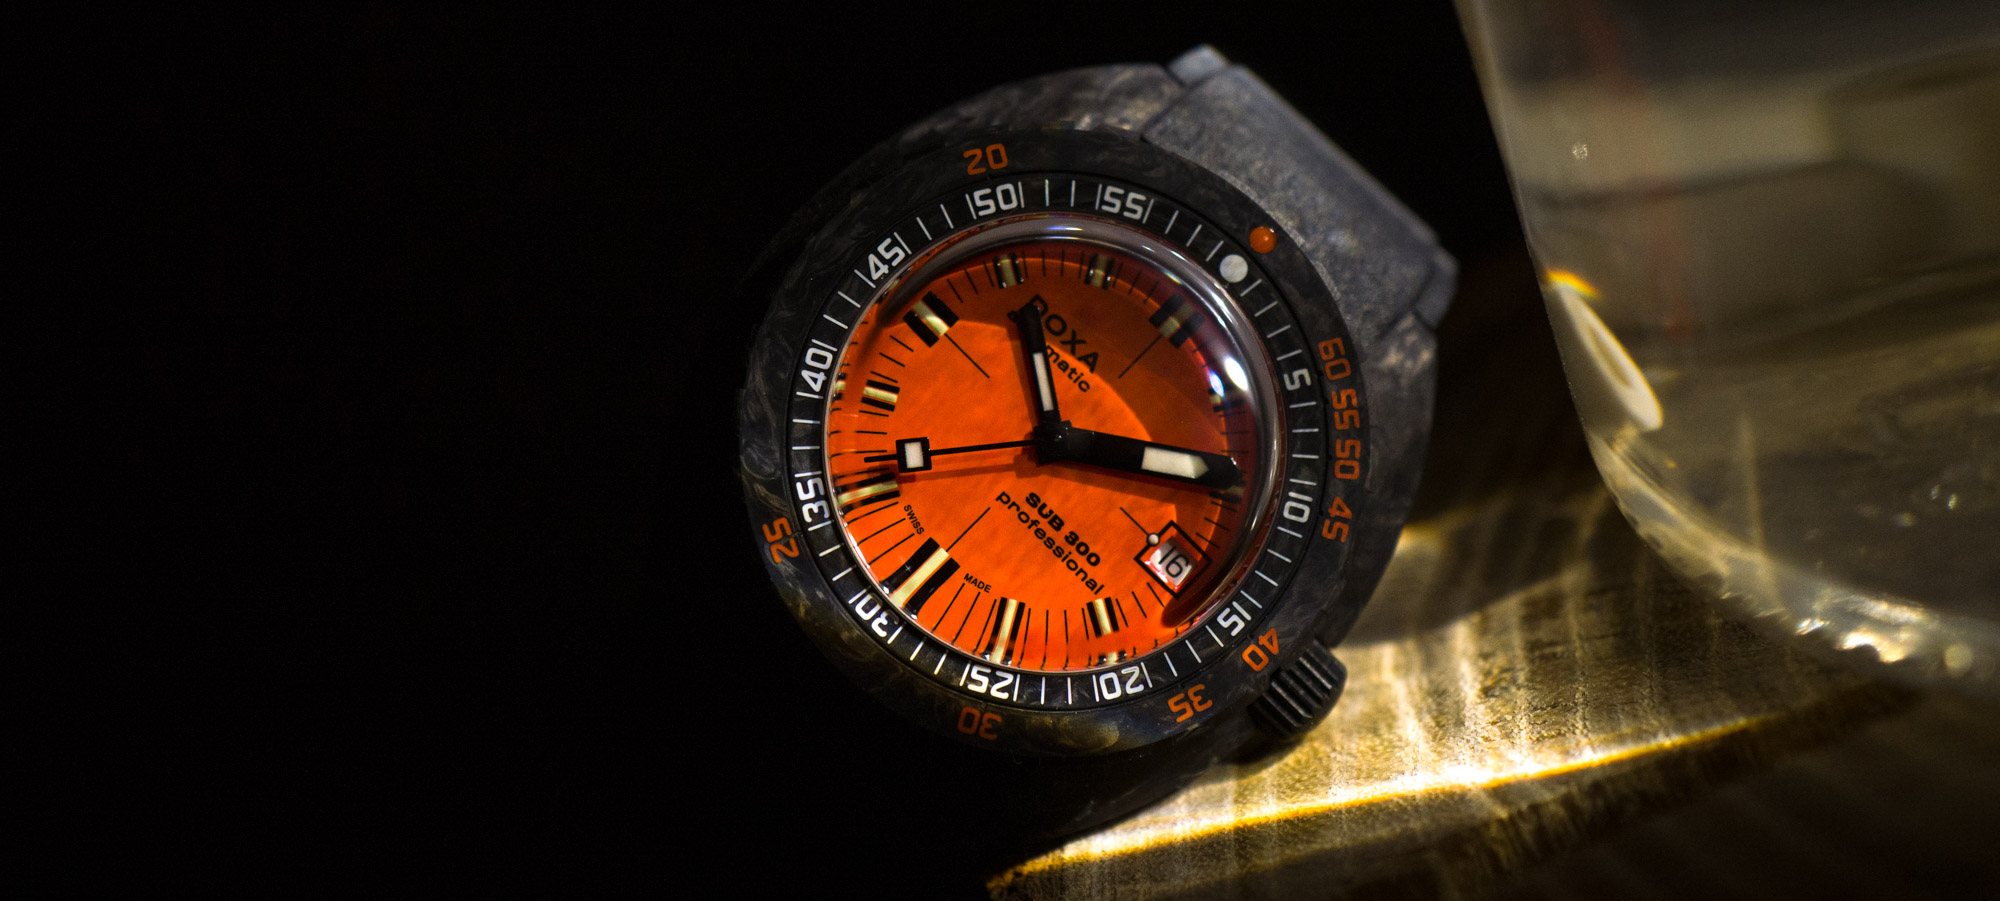 Hands-On: Doxa Sub 300 Carbon Dive Watch